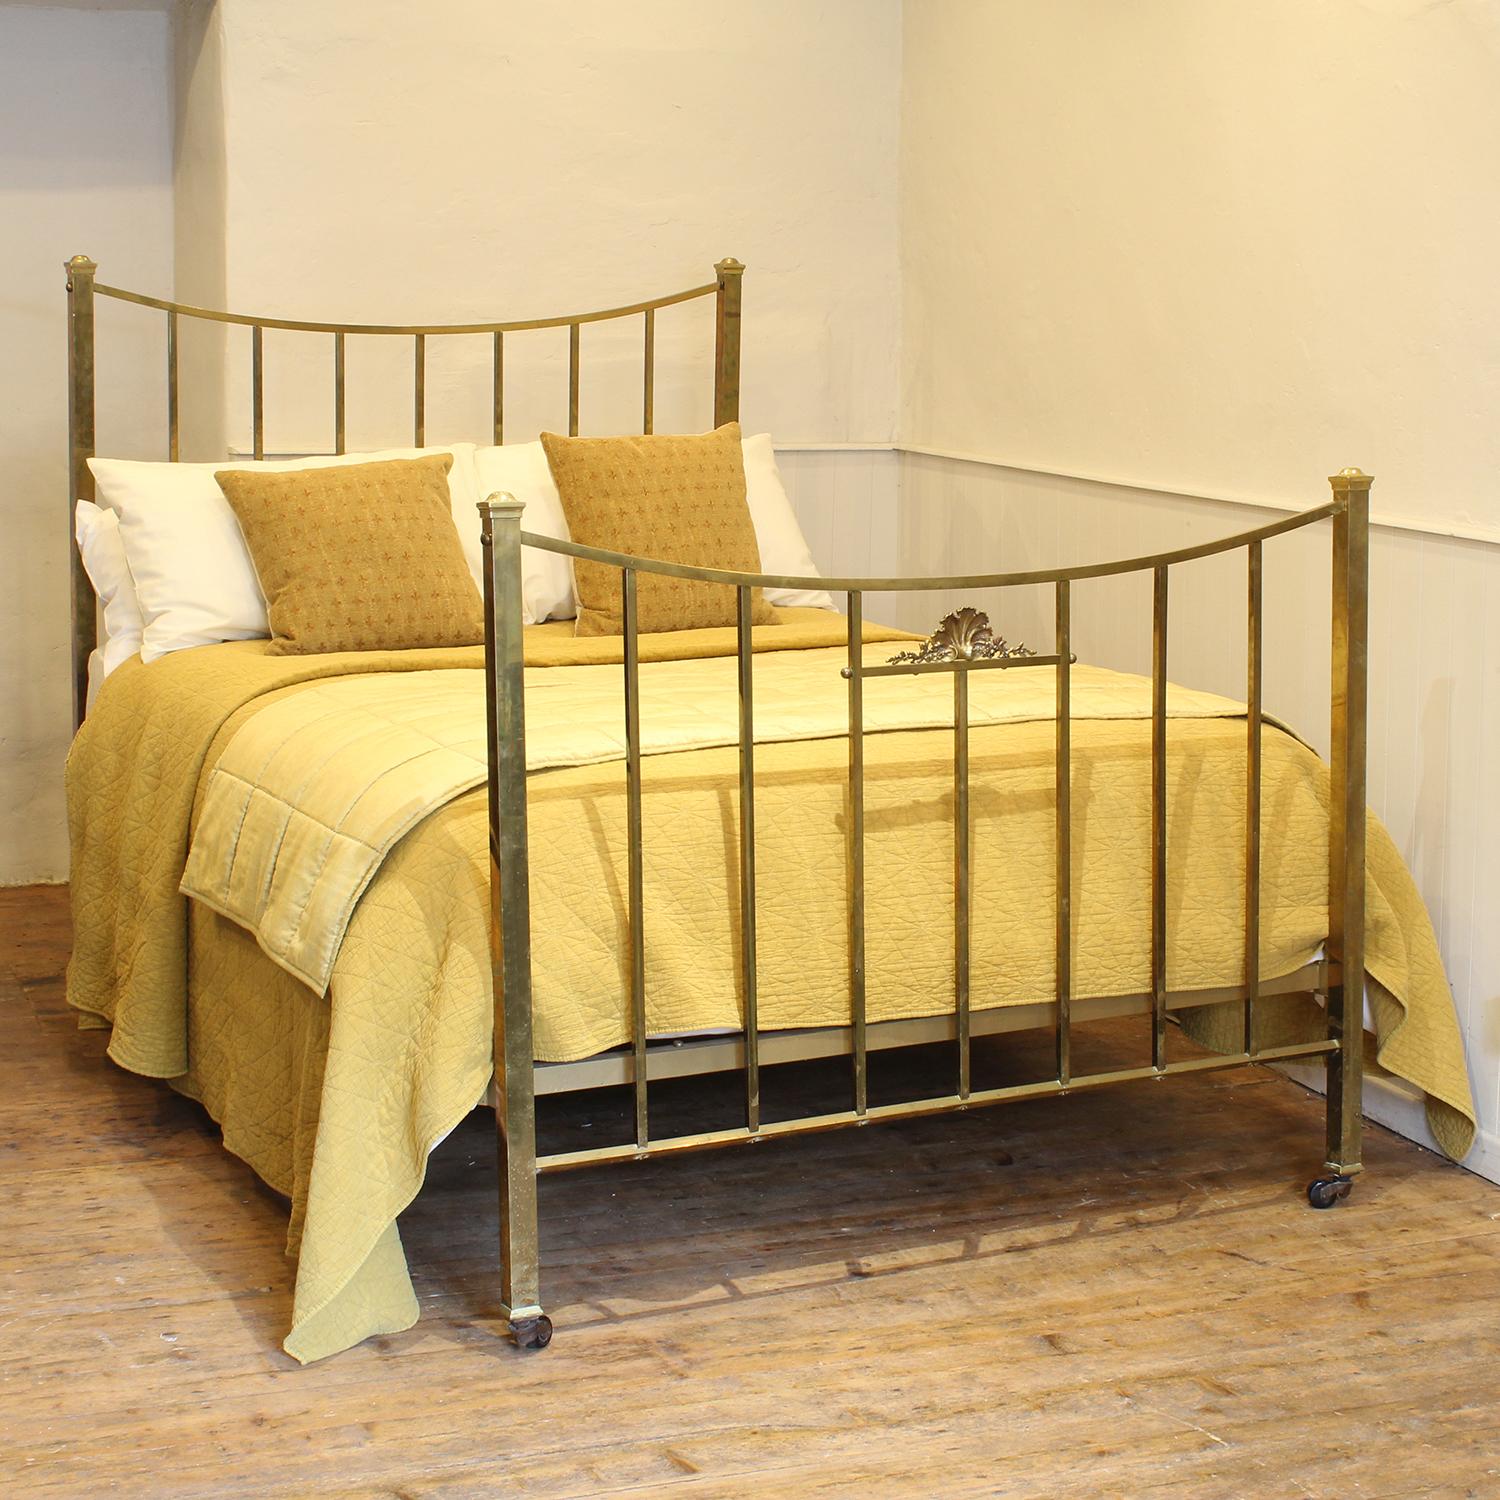 An attractive Edwardian bedstead with square section brass rails, sweeping curved top rail and central decorative cast feature in the centre of the foot panel.

This bed accepts a double size 4ft 6in wide (54 inch or 135cm) base and mattress.